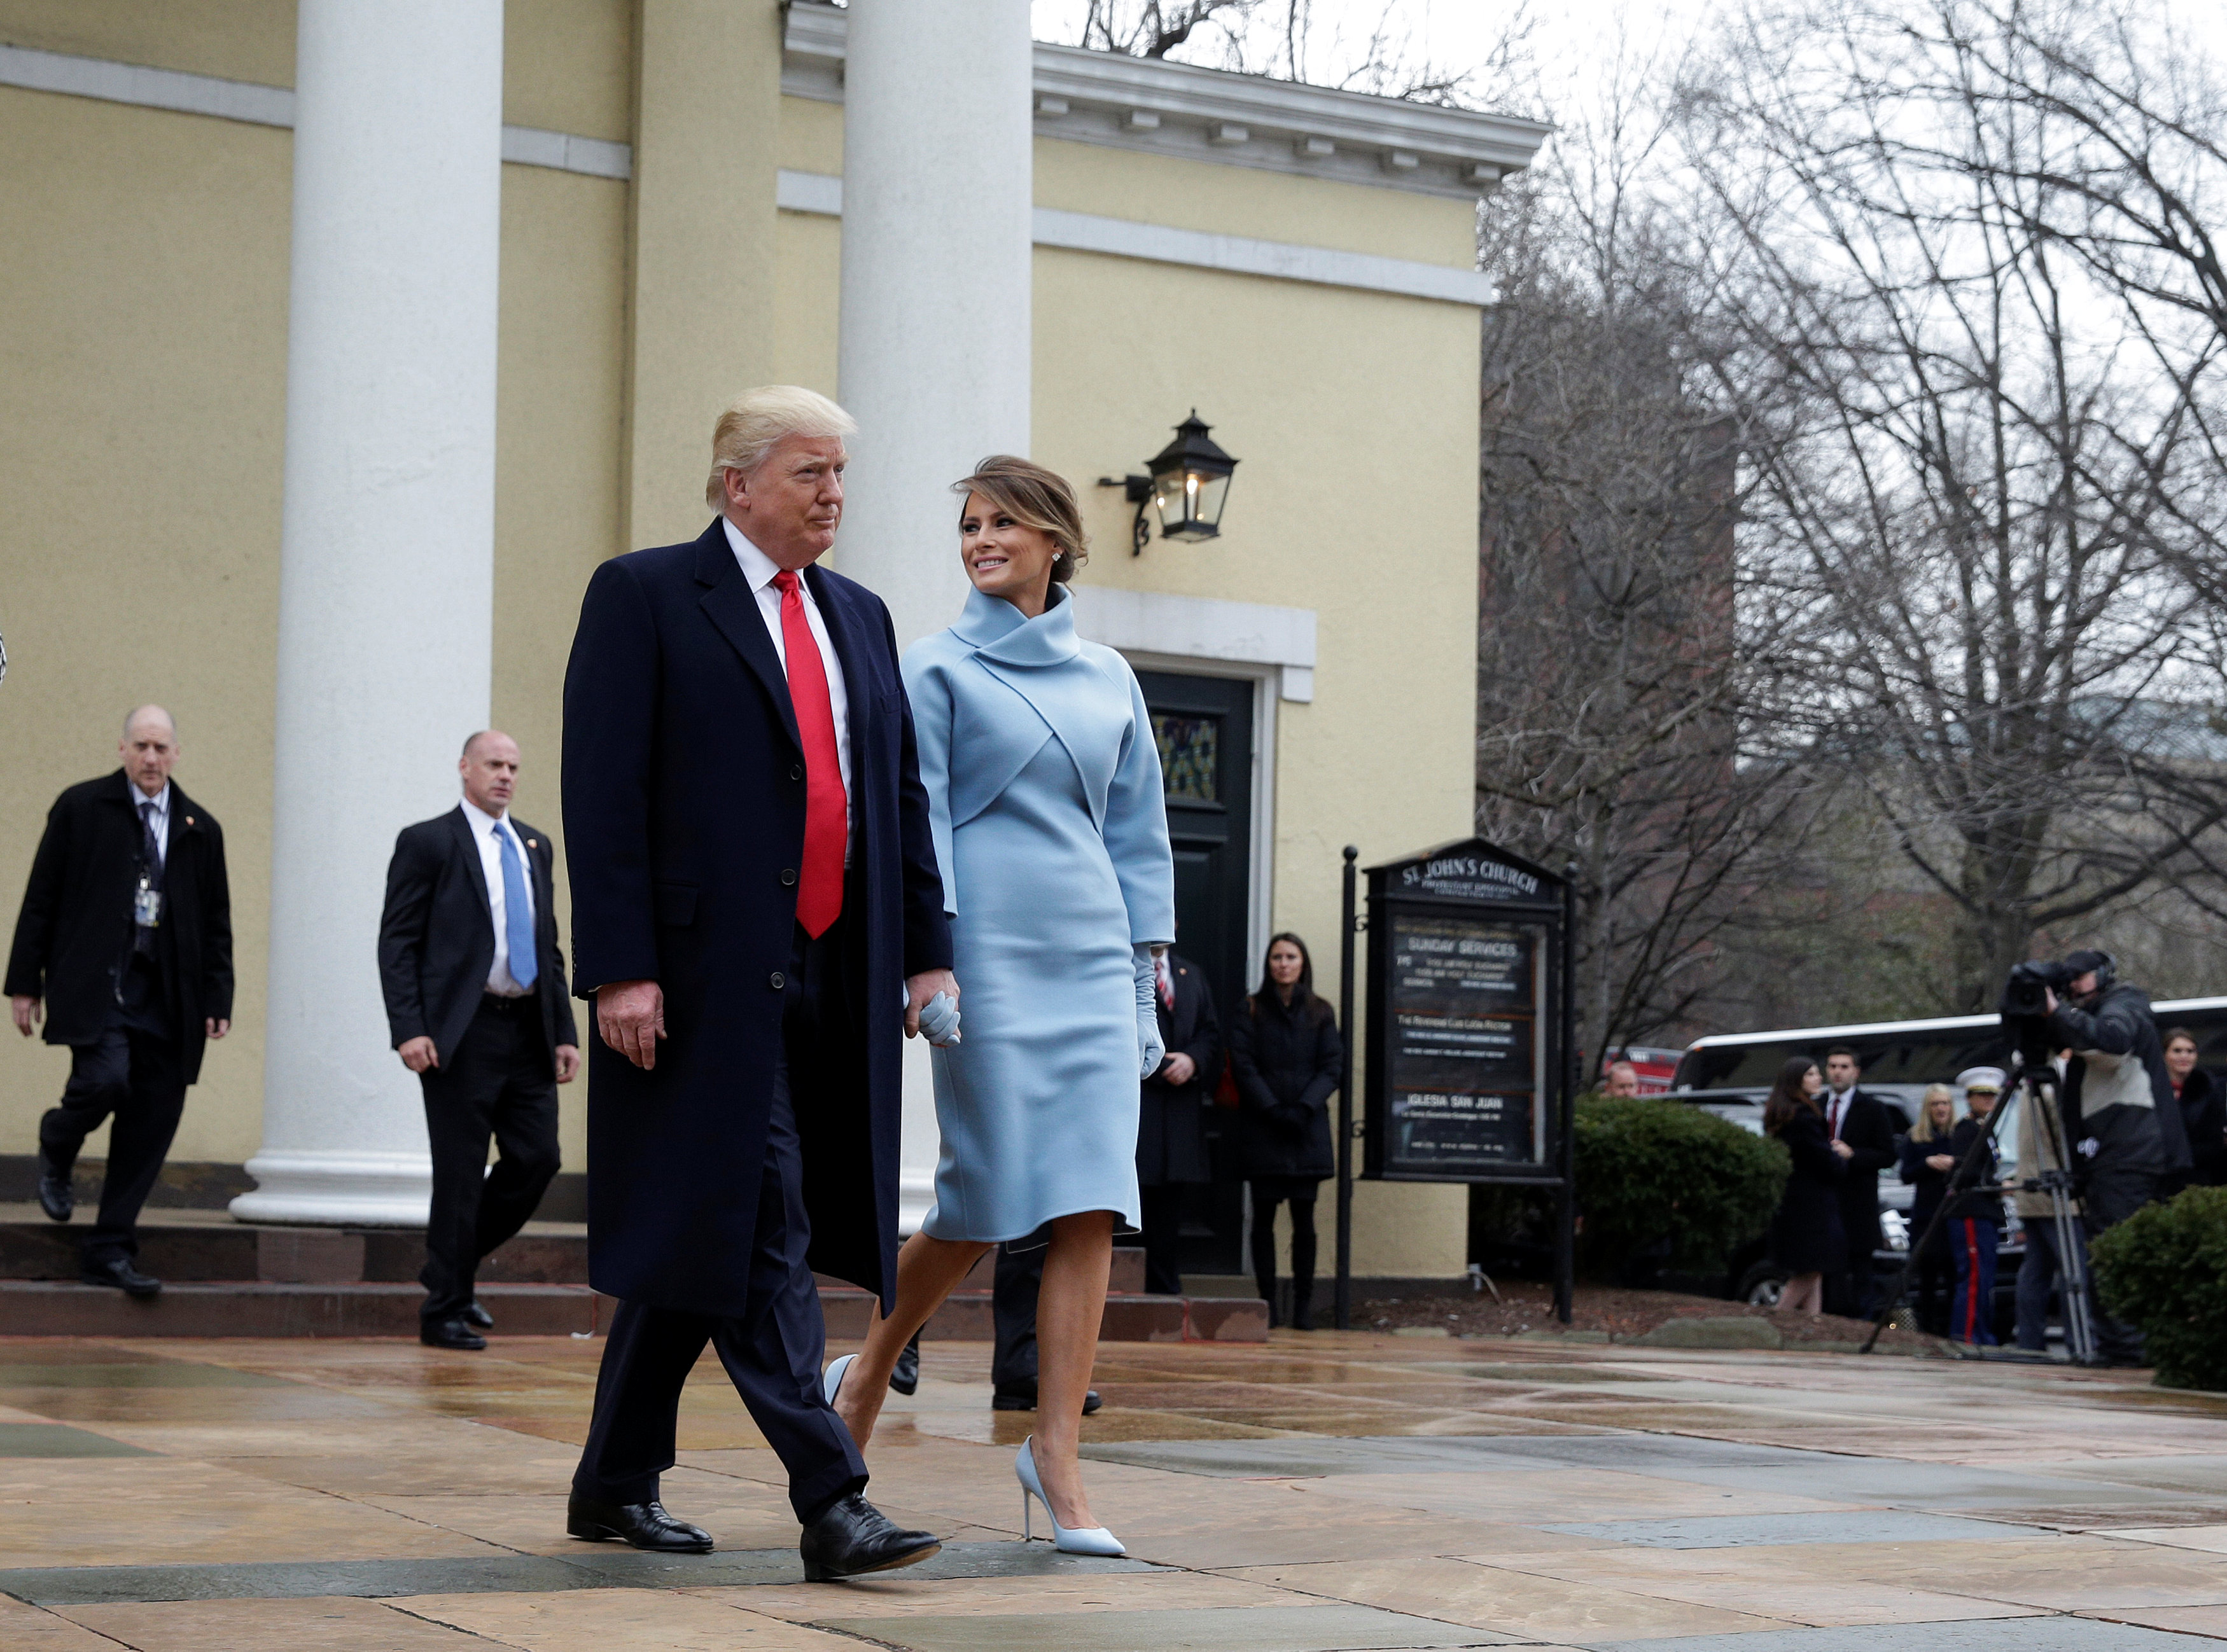 President-elect Donald Trump and his wife Melania depart from services at St. John's Church during his inauguration in Washington, U.S., January 20, 2017. REUTERS/Joshua Roberts